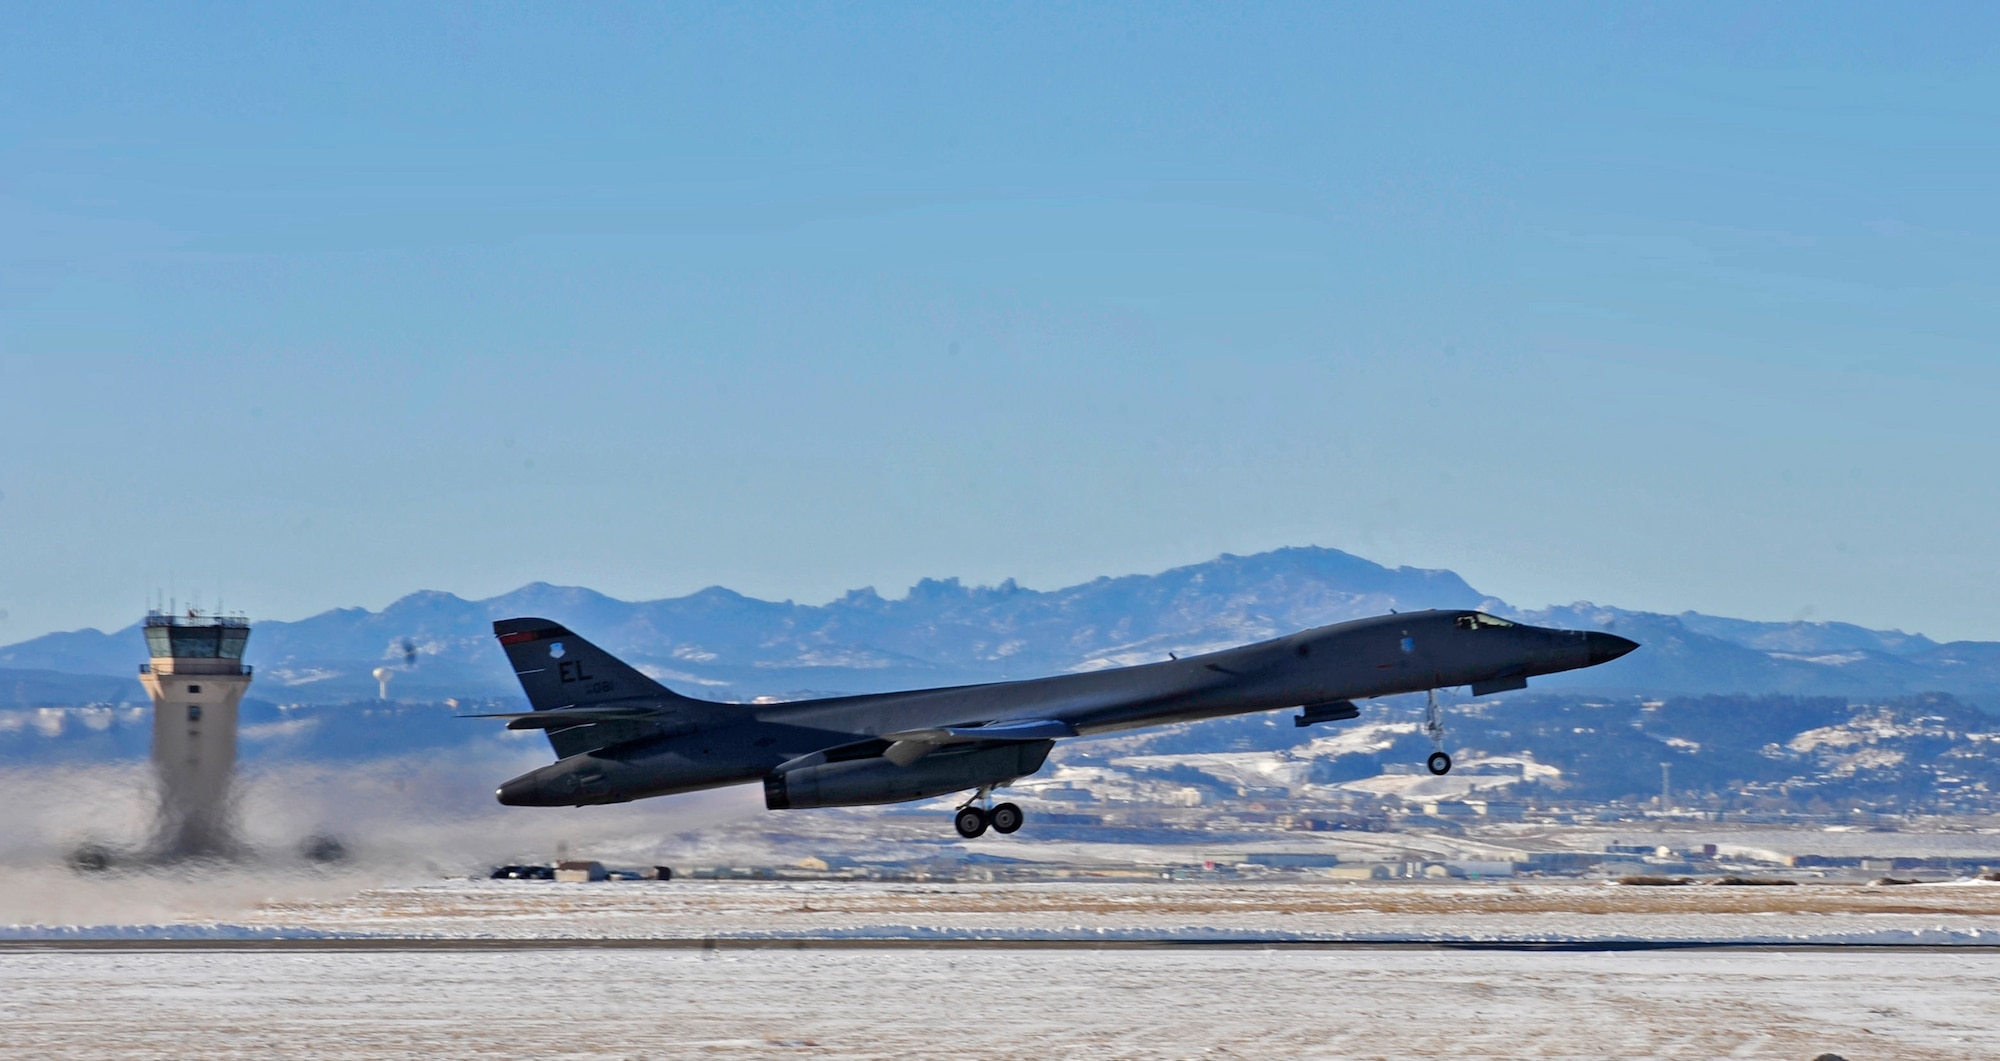 A B-1 bomber launches from Ellsworth Air Force Base, S.D., Dec. 2, 2015. The B-1 is one of many aircraft participating in the first Large Force Exercise in the newly expanded Powder River Training Complex. (U.S. Air Force photo by Airman 1st Class James L. Miller/Released.) 